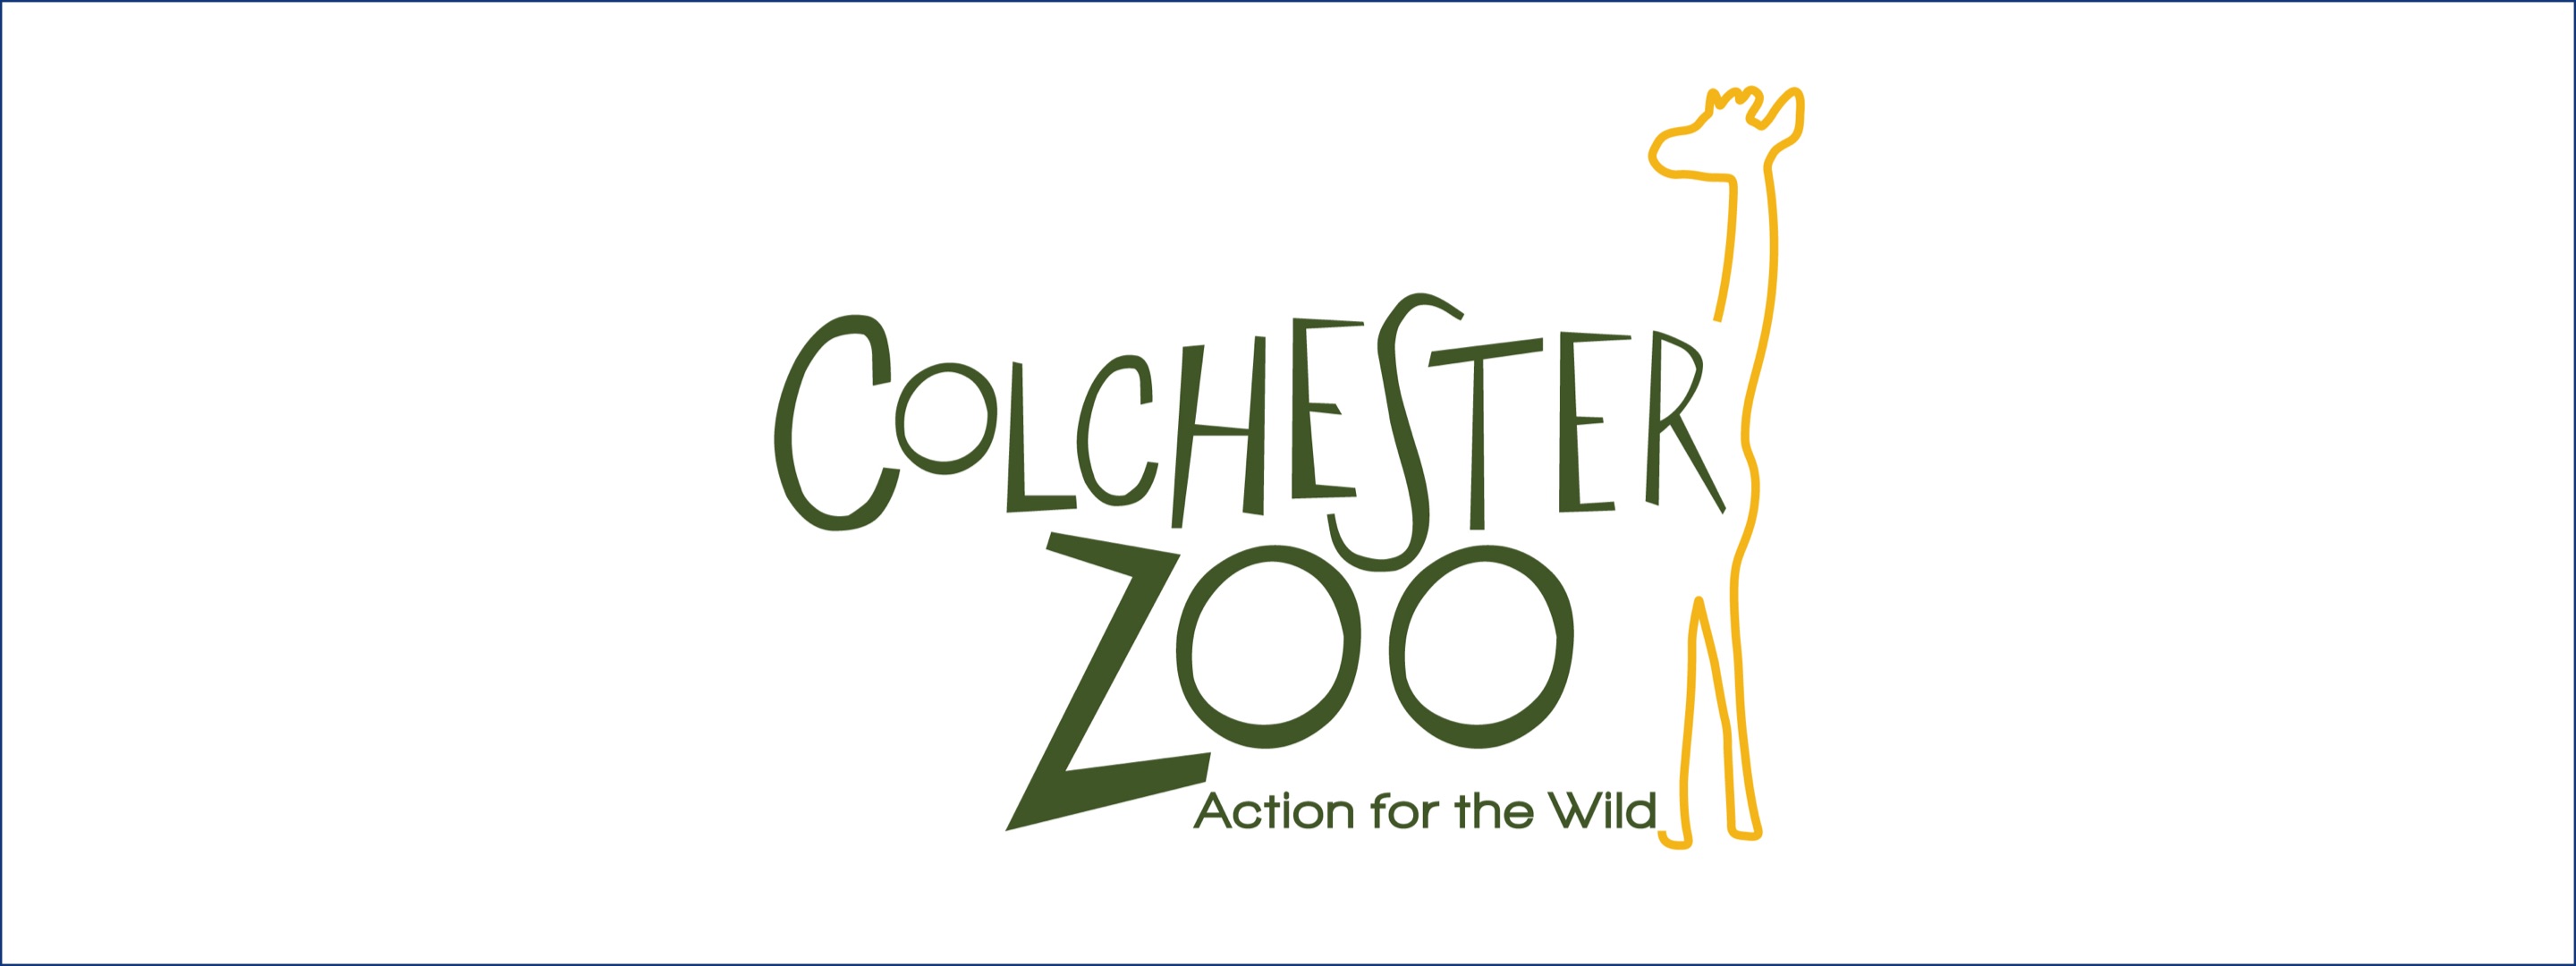 colchester_zoo_main_x2